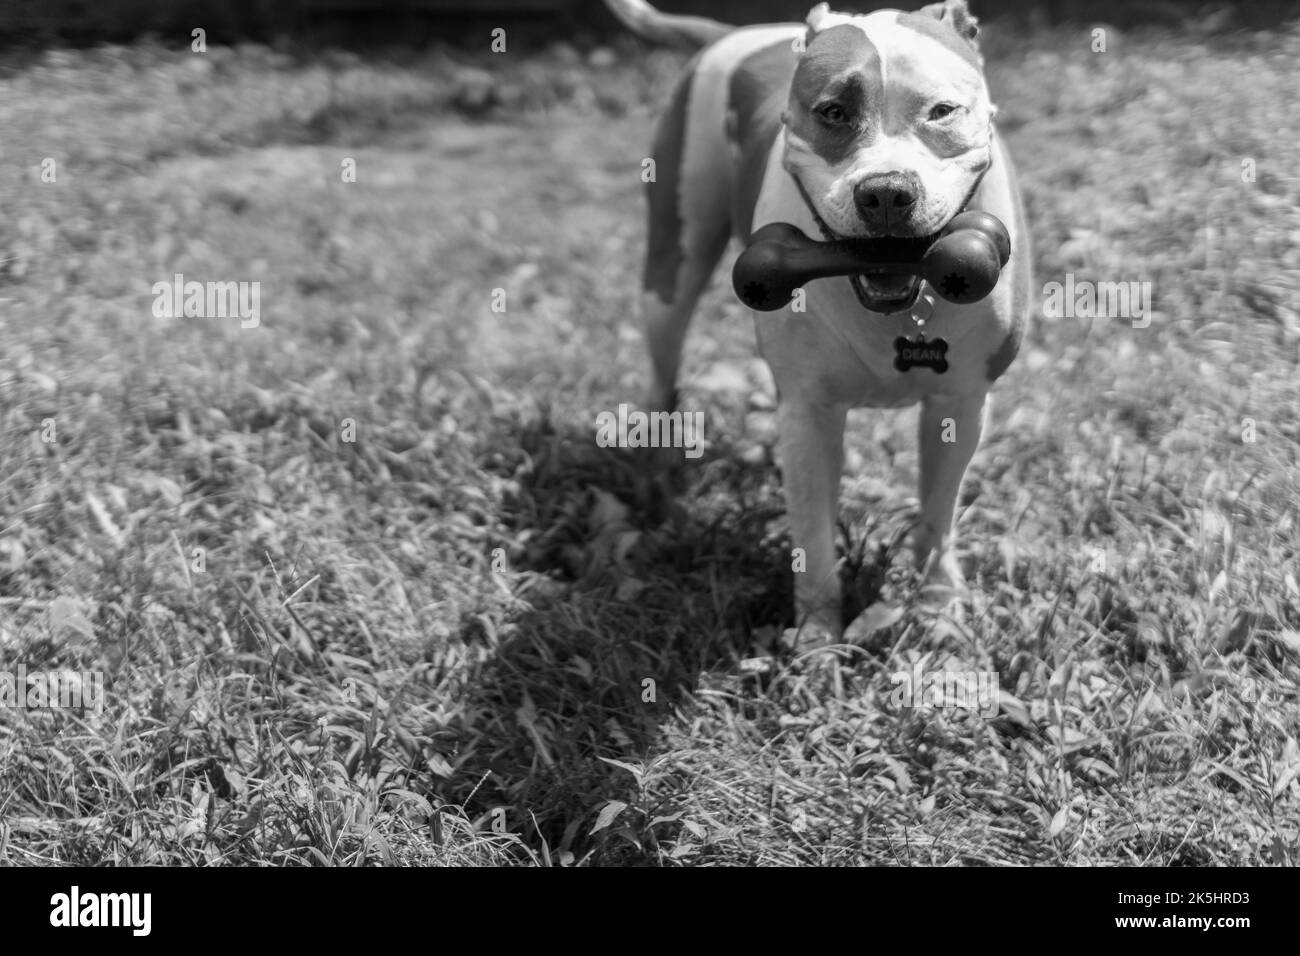 A large pitbull dog (American Pit Bull Terrier) (canis lupus familiaris) playfully waits to play fetch in a grassy yard with a bone-shaped dog toy Stock Photo